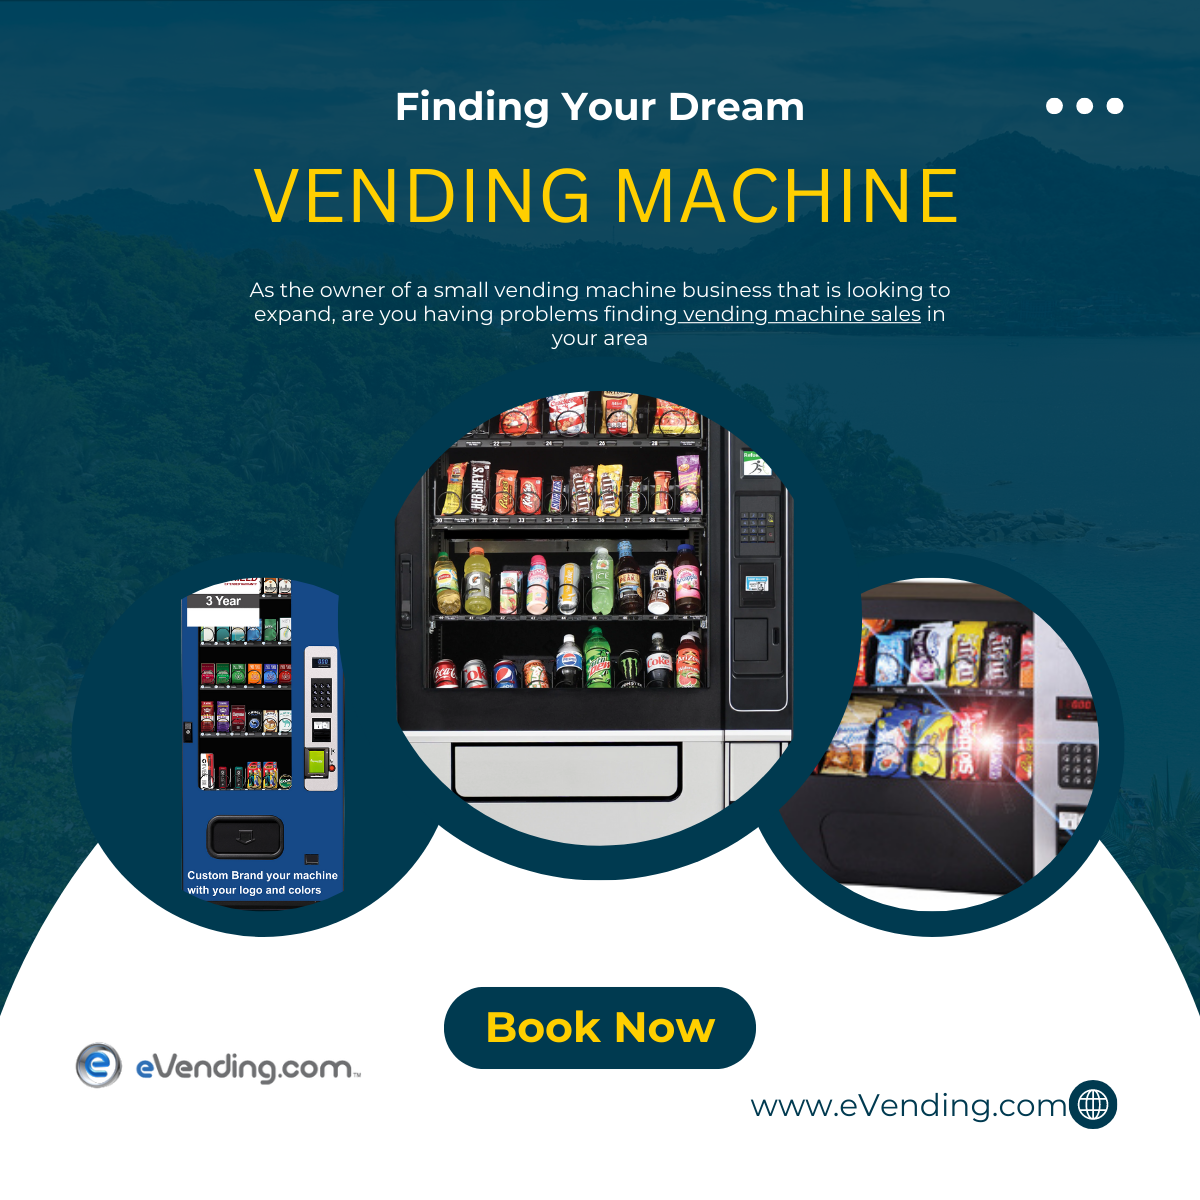 ARE YOU HAVING PROBLEMS FINDING VENDING MACHINE SALES IN YOUR AREA?